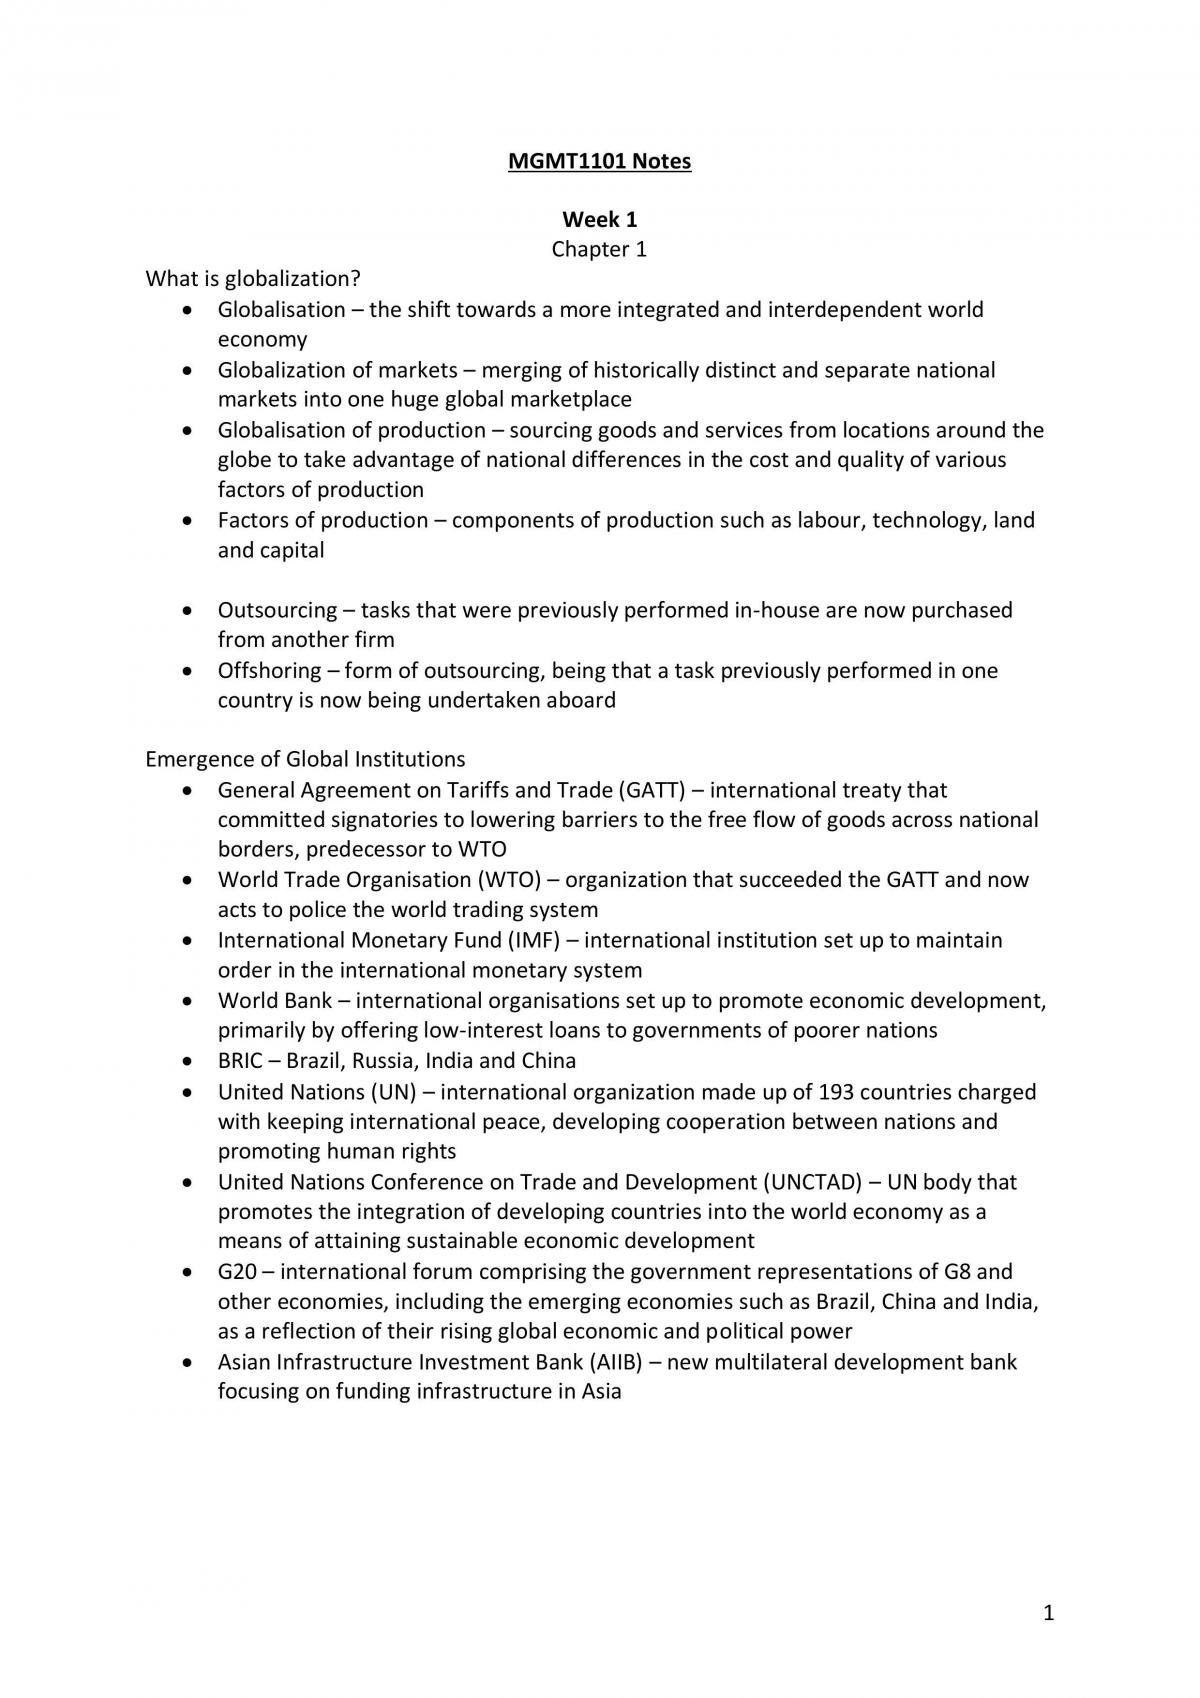 MGMT1101 HD Notes - Page 1